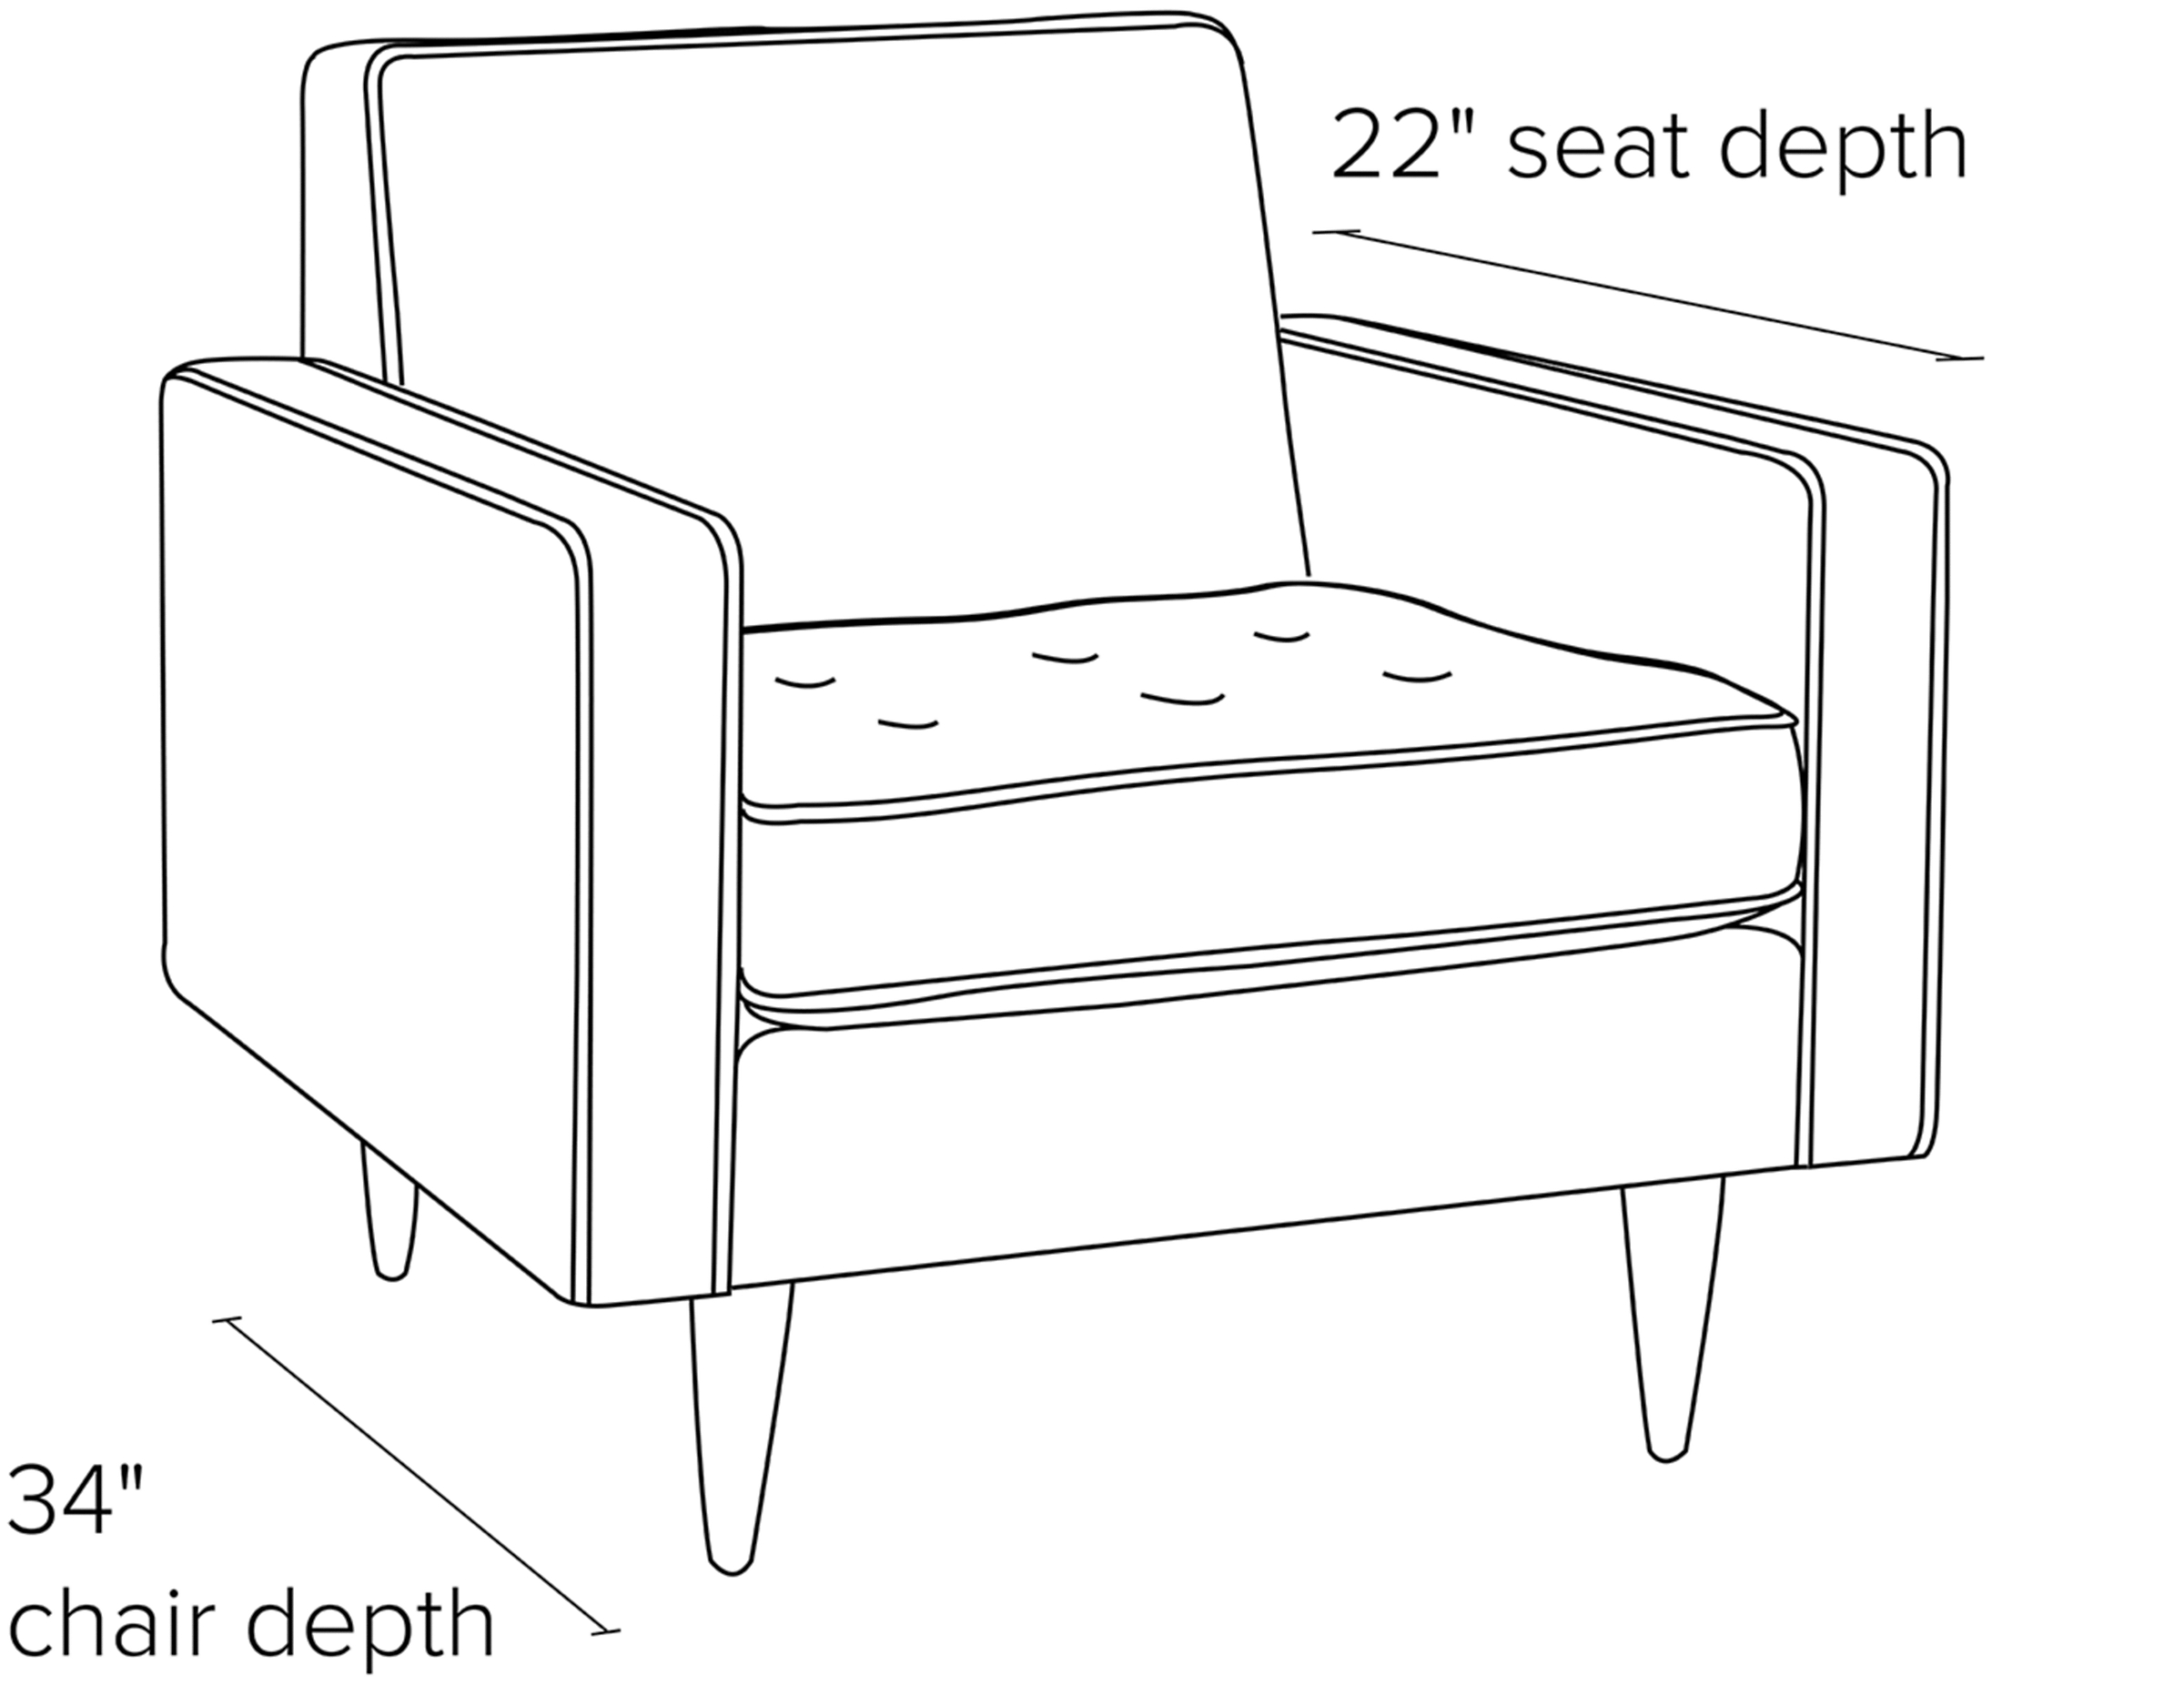 Side view dimension illustration of Reese chair.